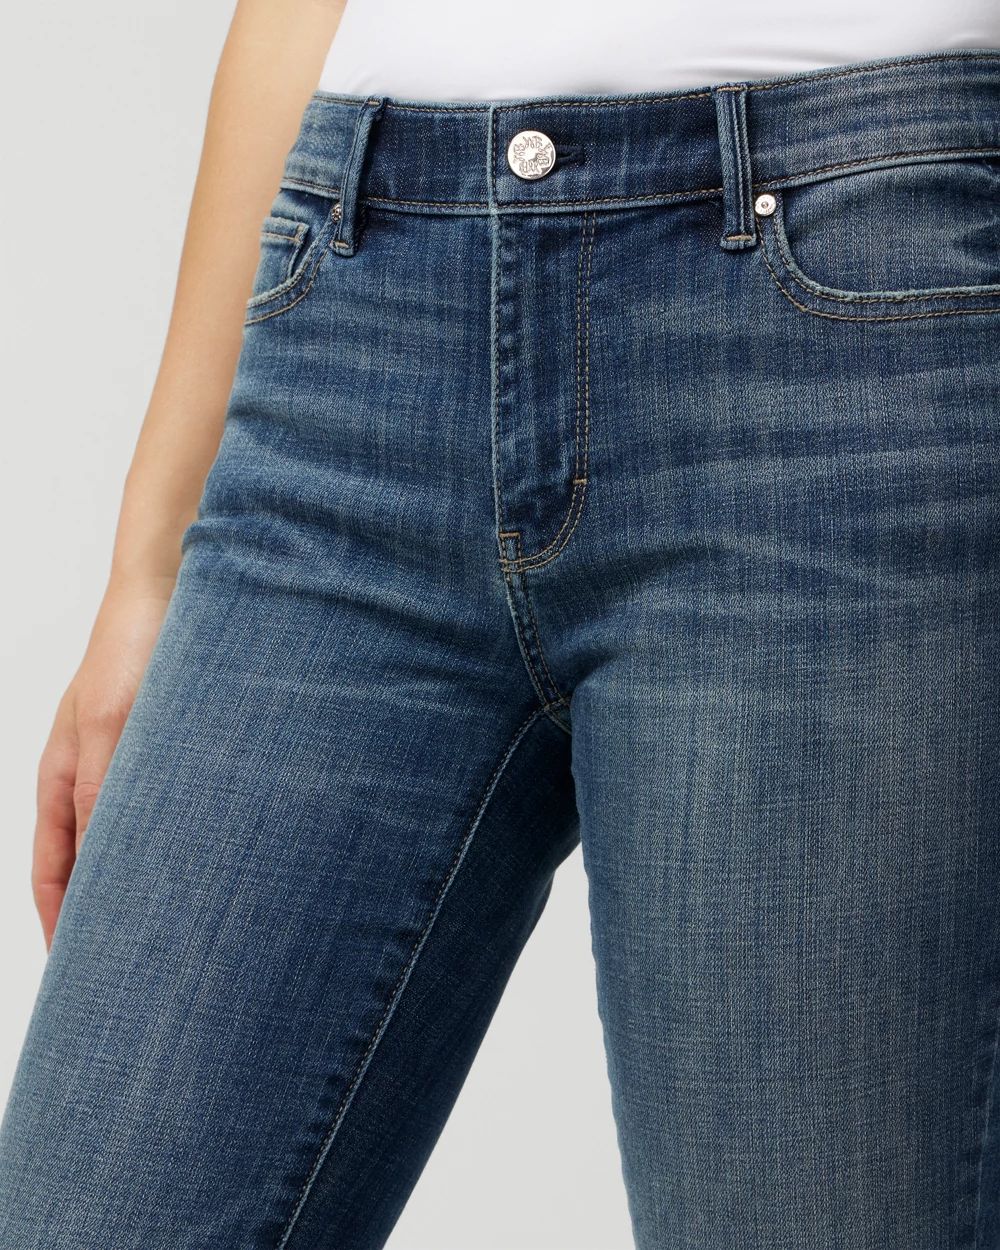 Mid-Rise Everyday Soft Denim  Bootcut Jeans click to view larger image.